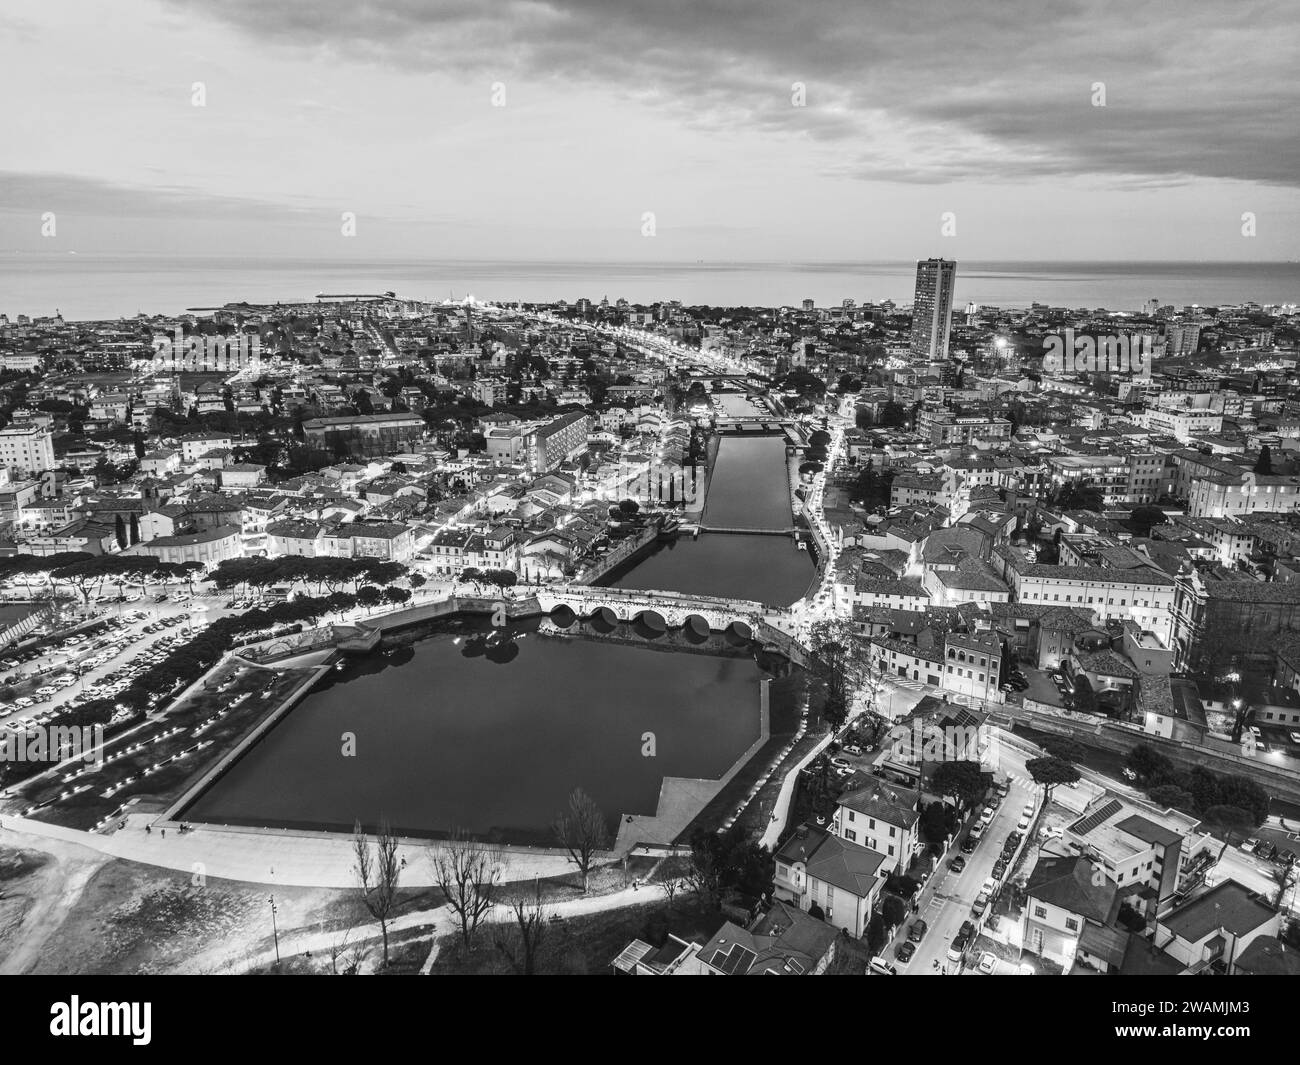 A stunning aerial view of Rimini, Italy at night during the Christmas season Stock Photo